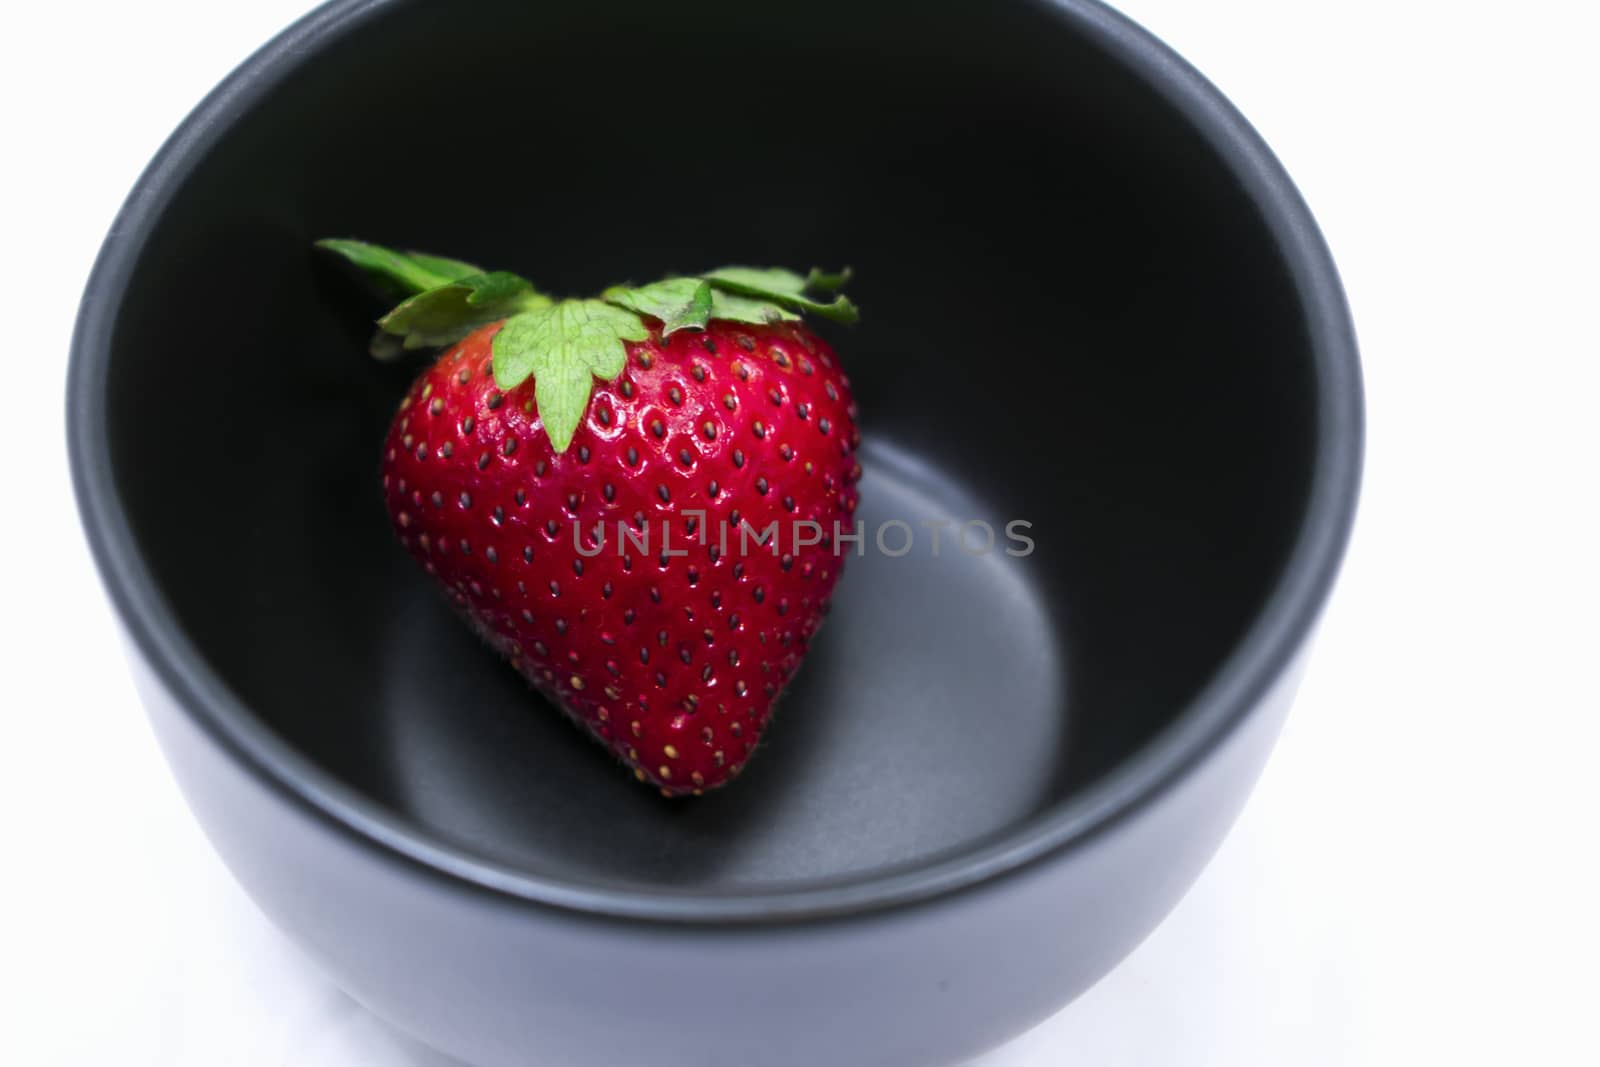 A Lone Strawberry in a Black Bowl